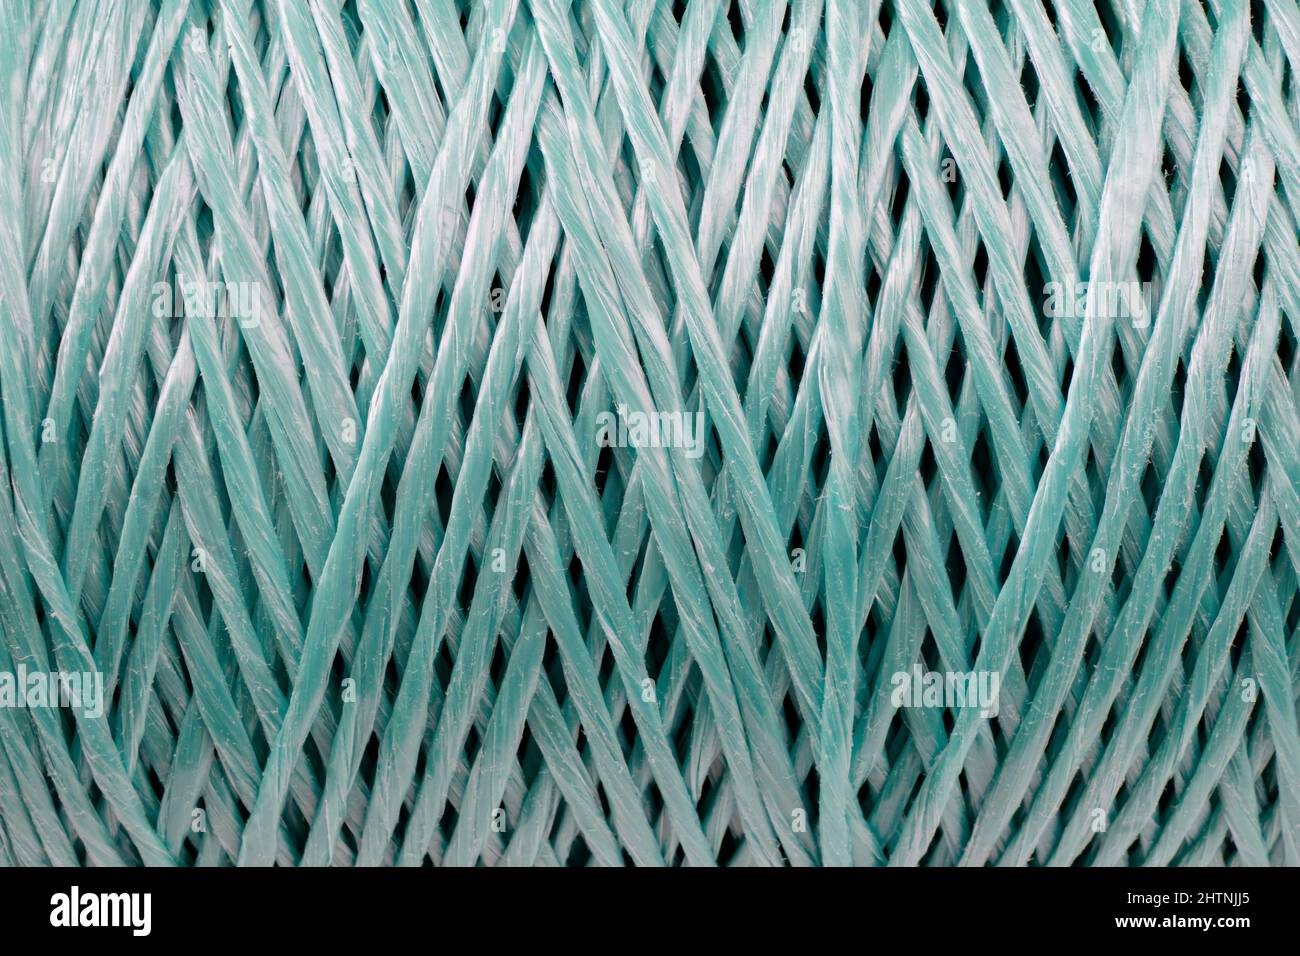 Coiled nylon rope texture background. Blue rolled  striped nylon rope pattern. A coil of new colored rope surface Stock Photo